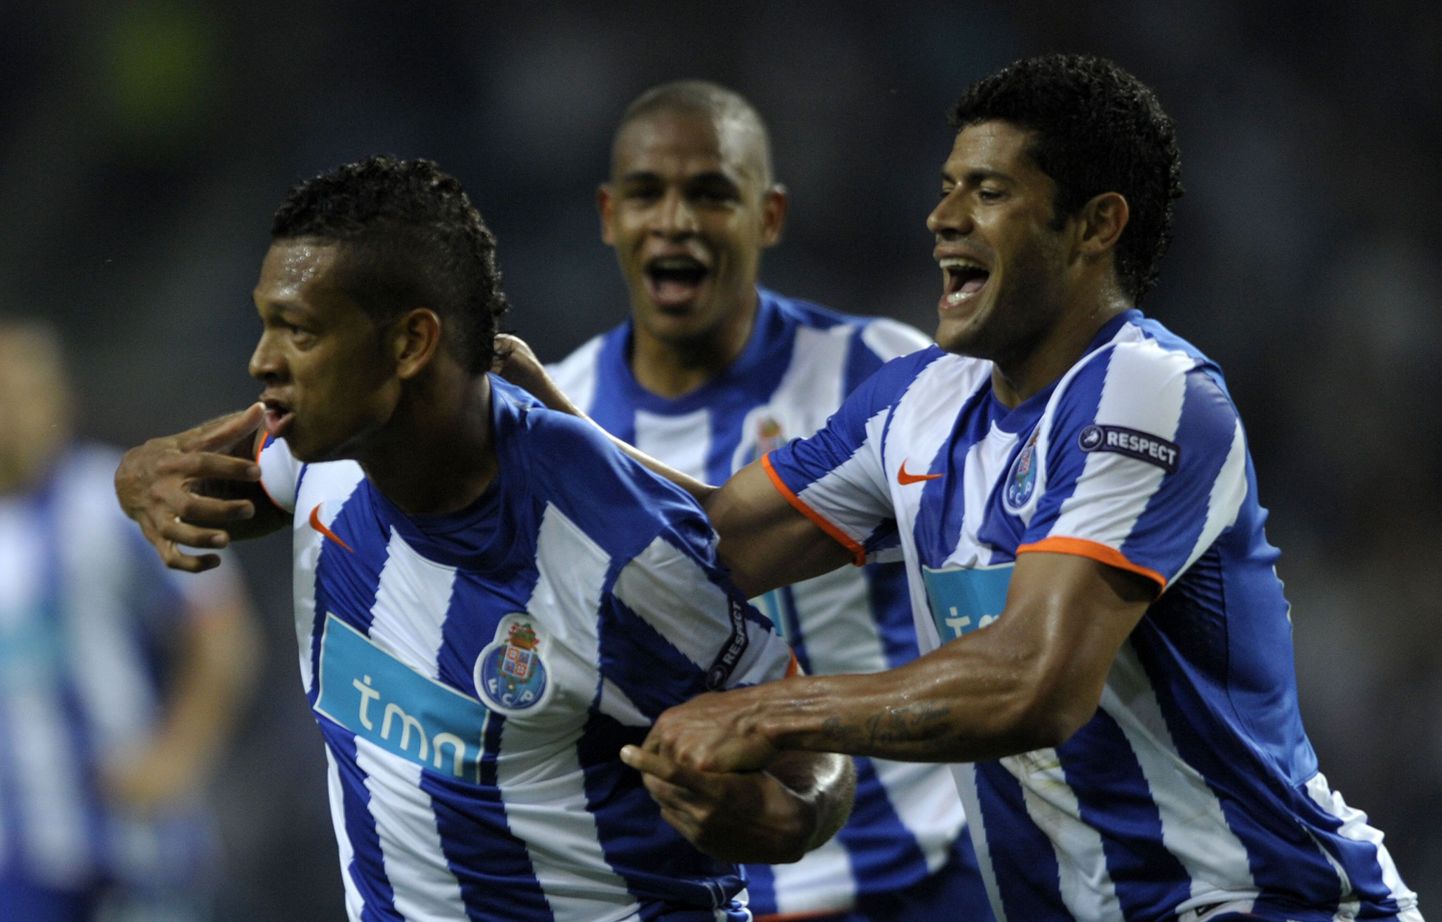 FC Porto's Colombia midfielder Fredy Guarin (L) celebrates with teammates Brazil forward Givanildo de Souza "Hulk" (R) and Brazilian midfielder Fernando Reges (C) after scoring during their UEFA Europa League semifinal first-leg football match against Villarreal at the Dragao Stadium in Porto, on April 28, 2011.    AFP PHOTO/ MIGUEL RIOPA